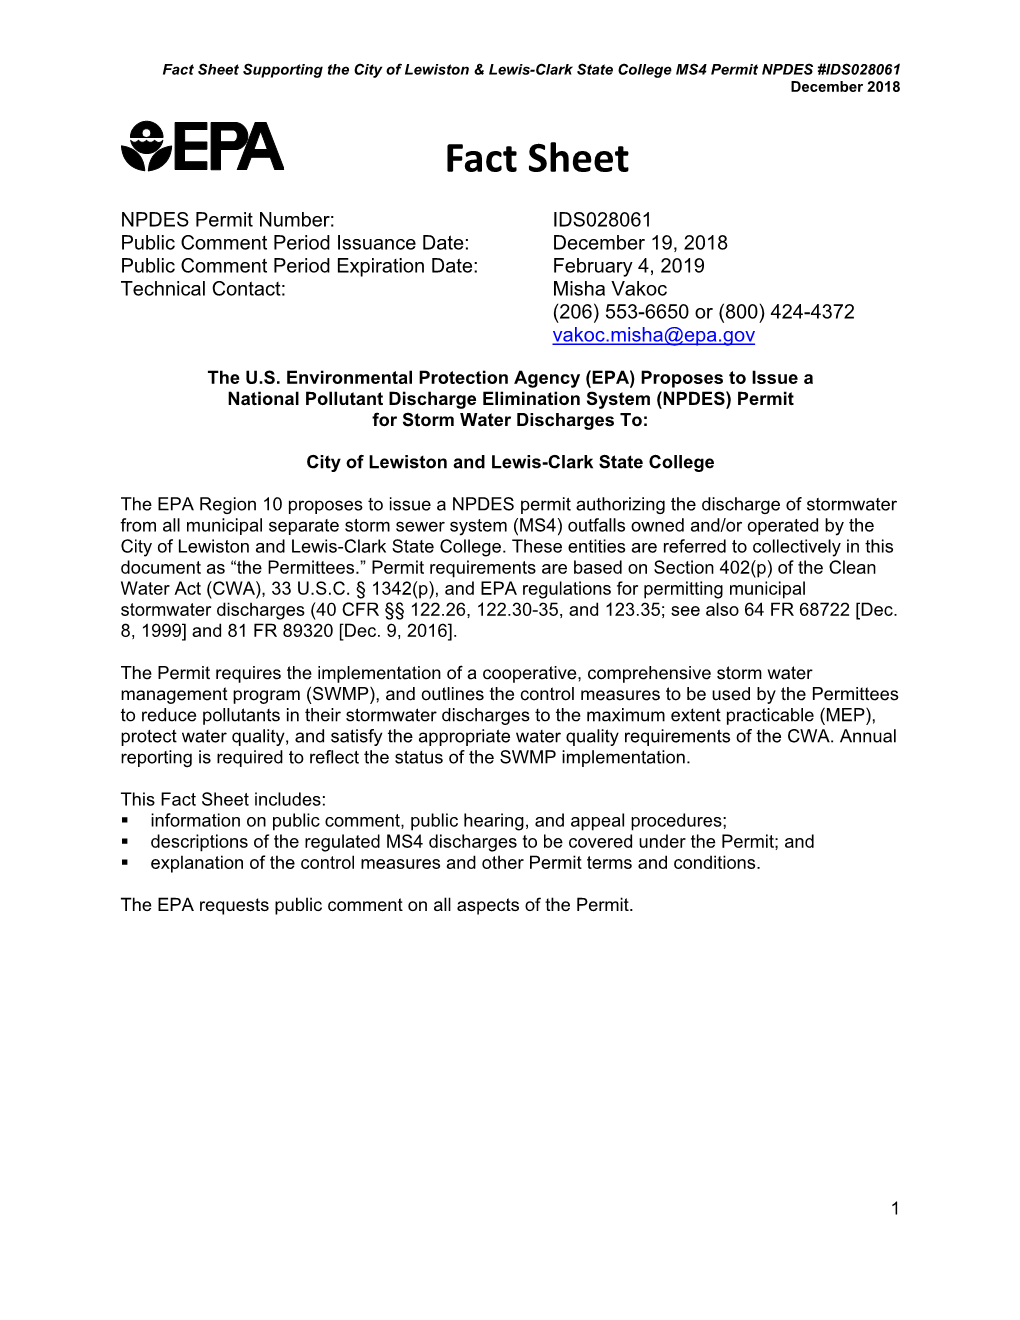 Fact Sheet for the Draft NPDES Permit for the City of Lewiston and Lewis Clark State College